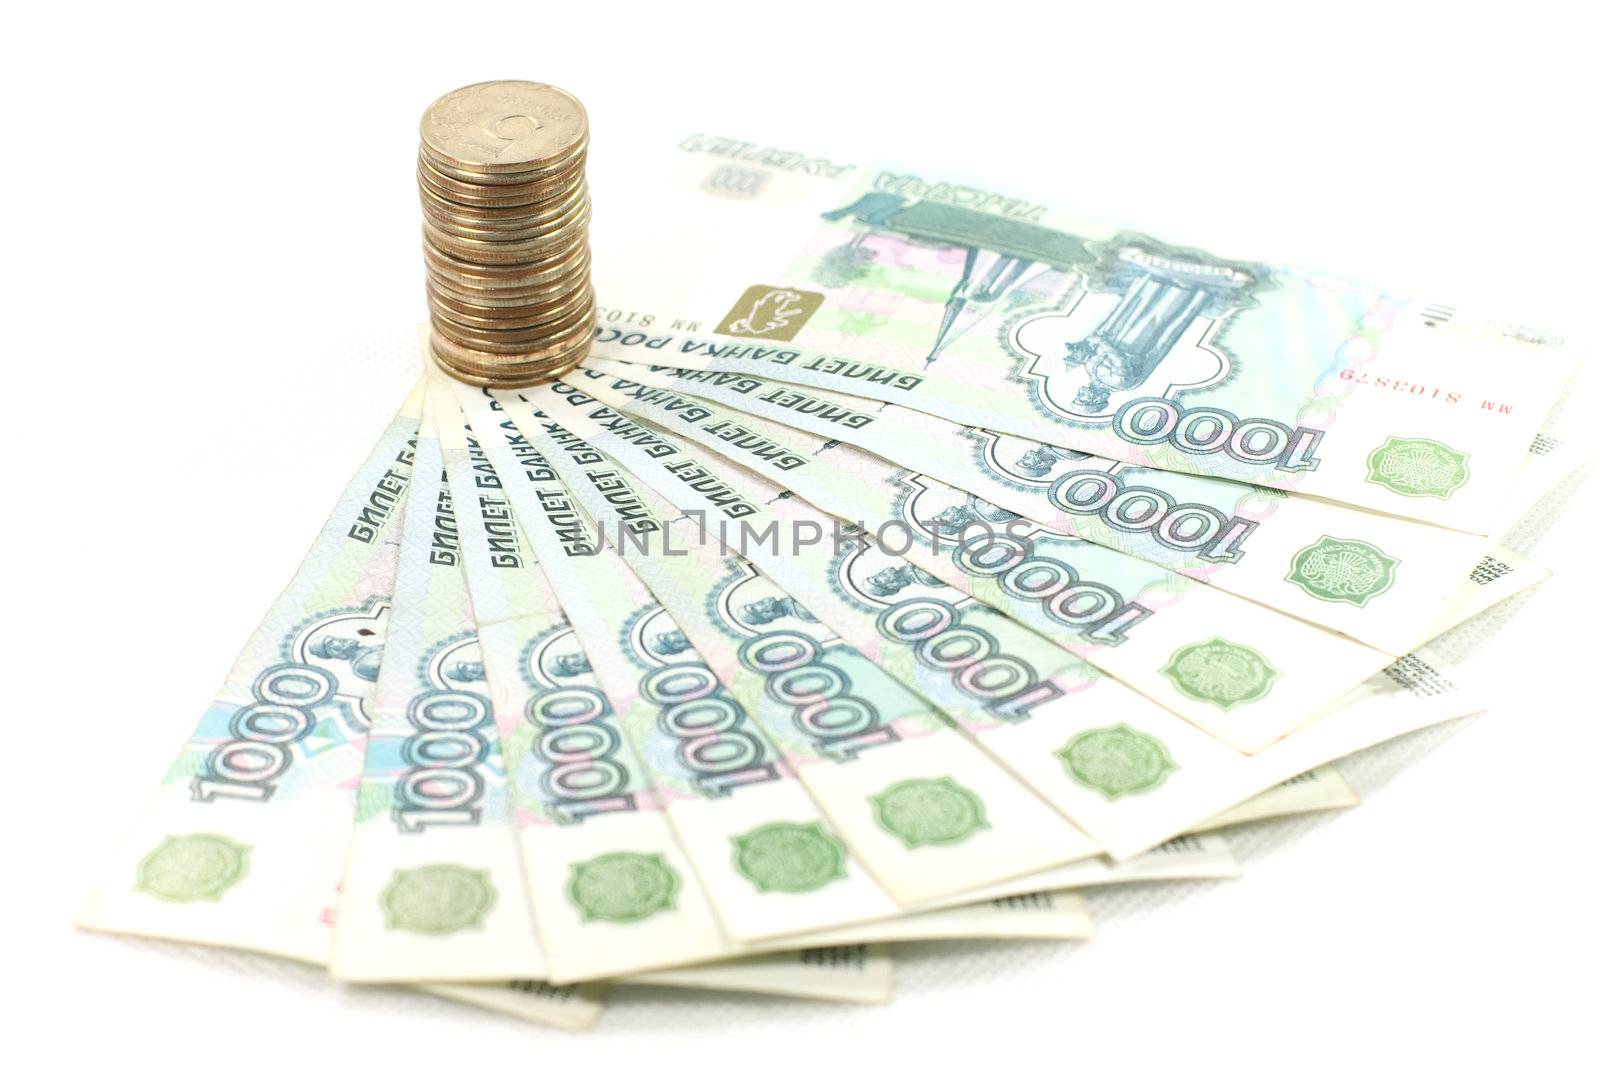 money, coins, roubles, paper, metal, the finance, business, well-being, the sum, denominations 